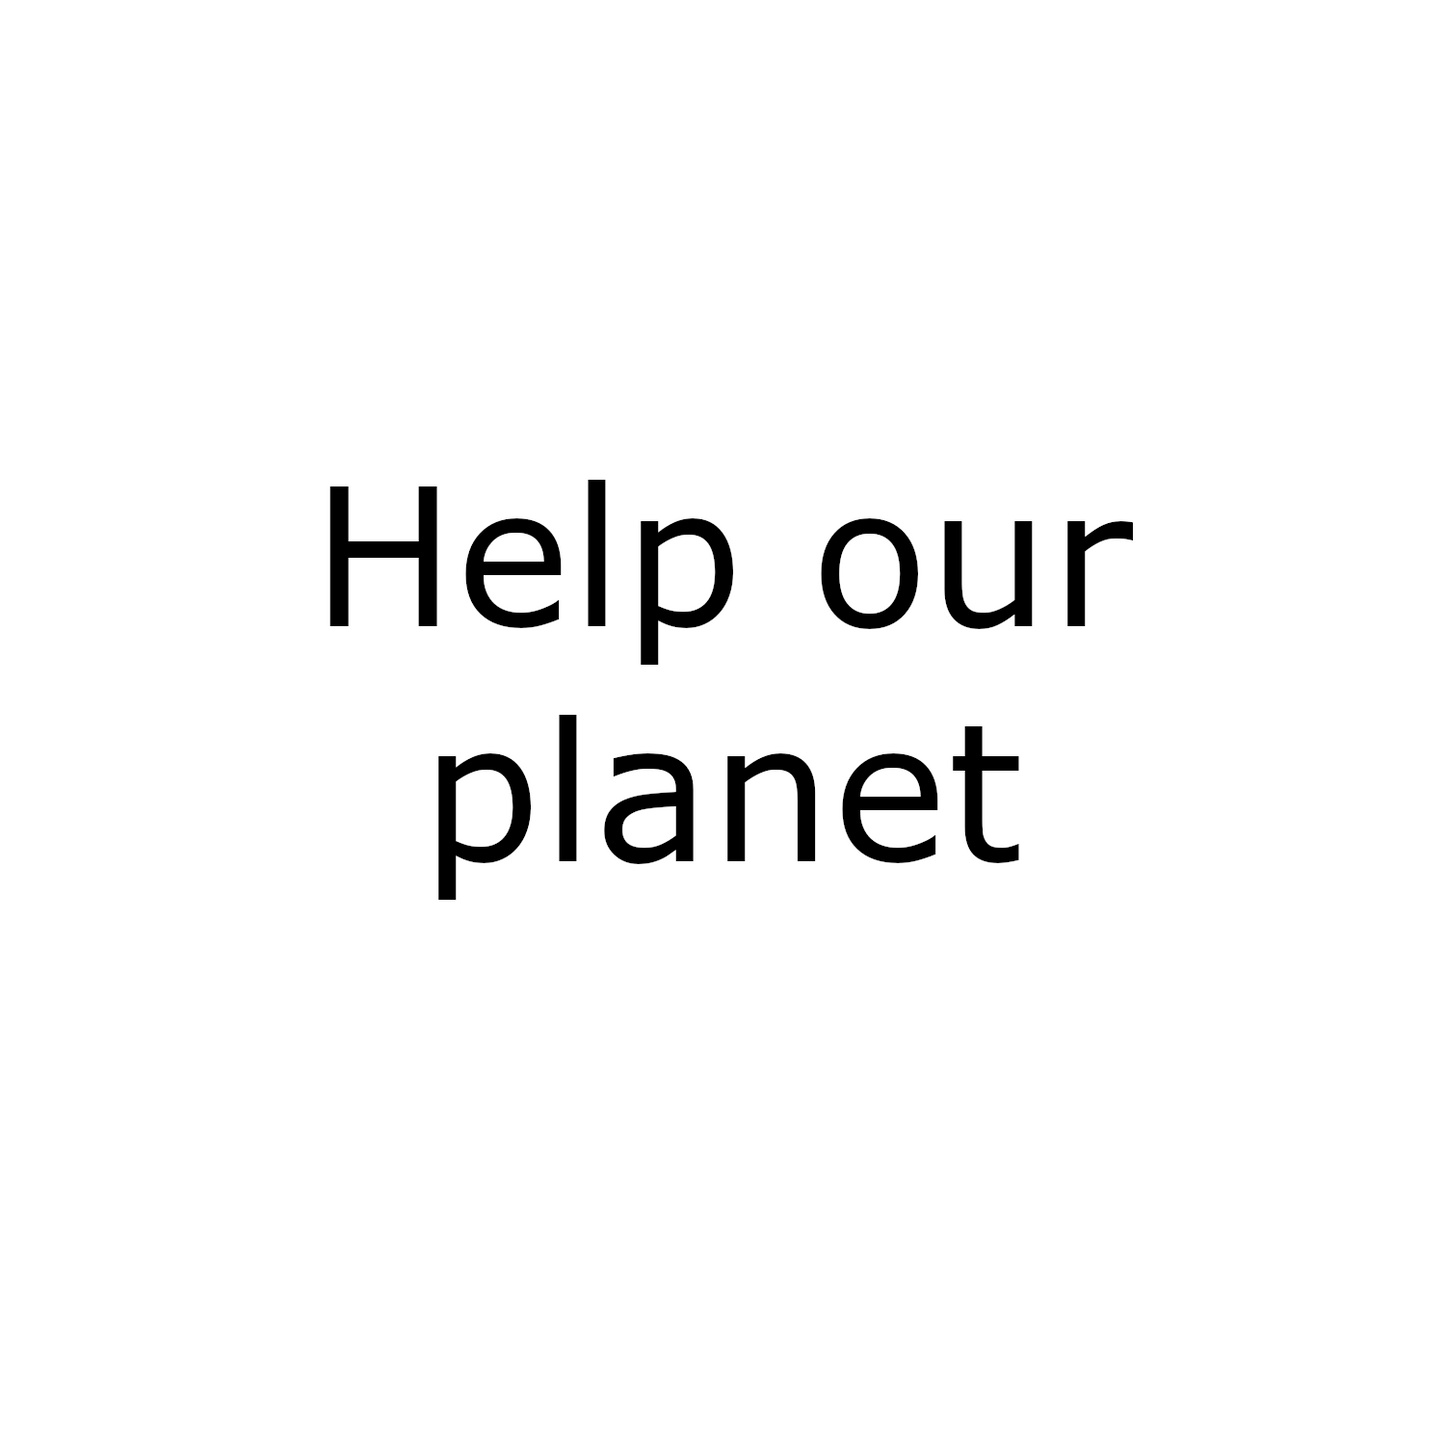 Help our planet